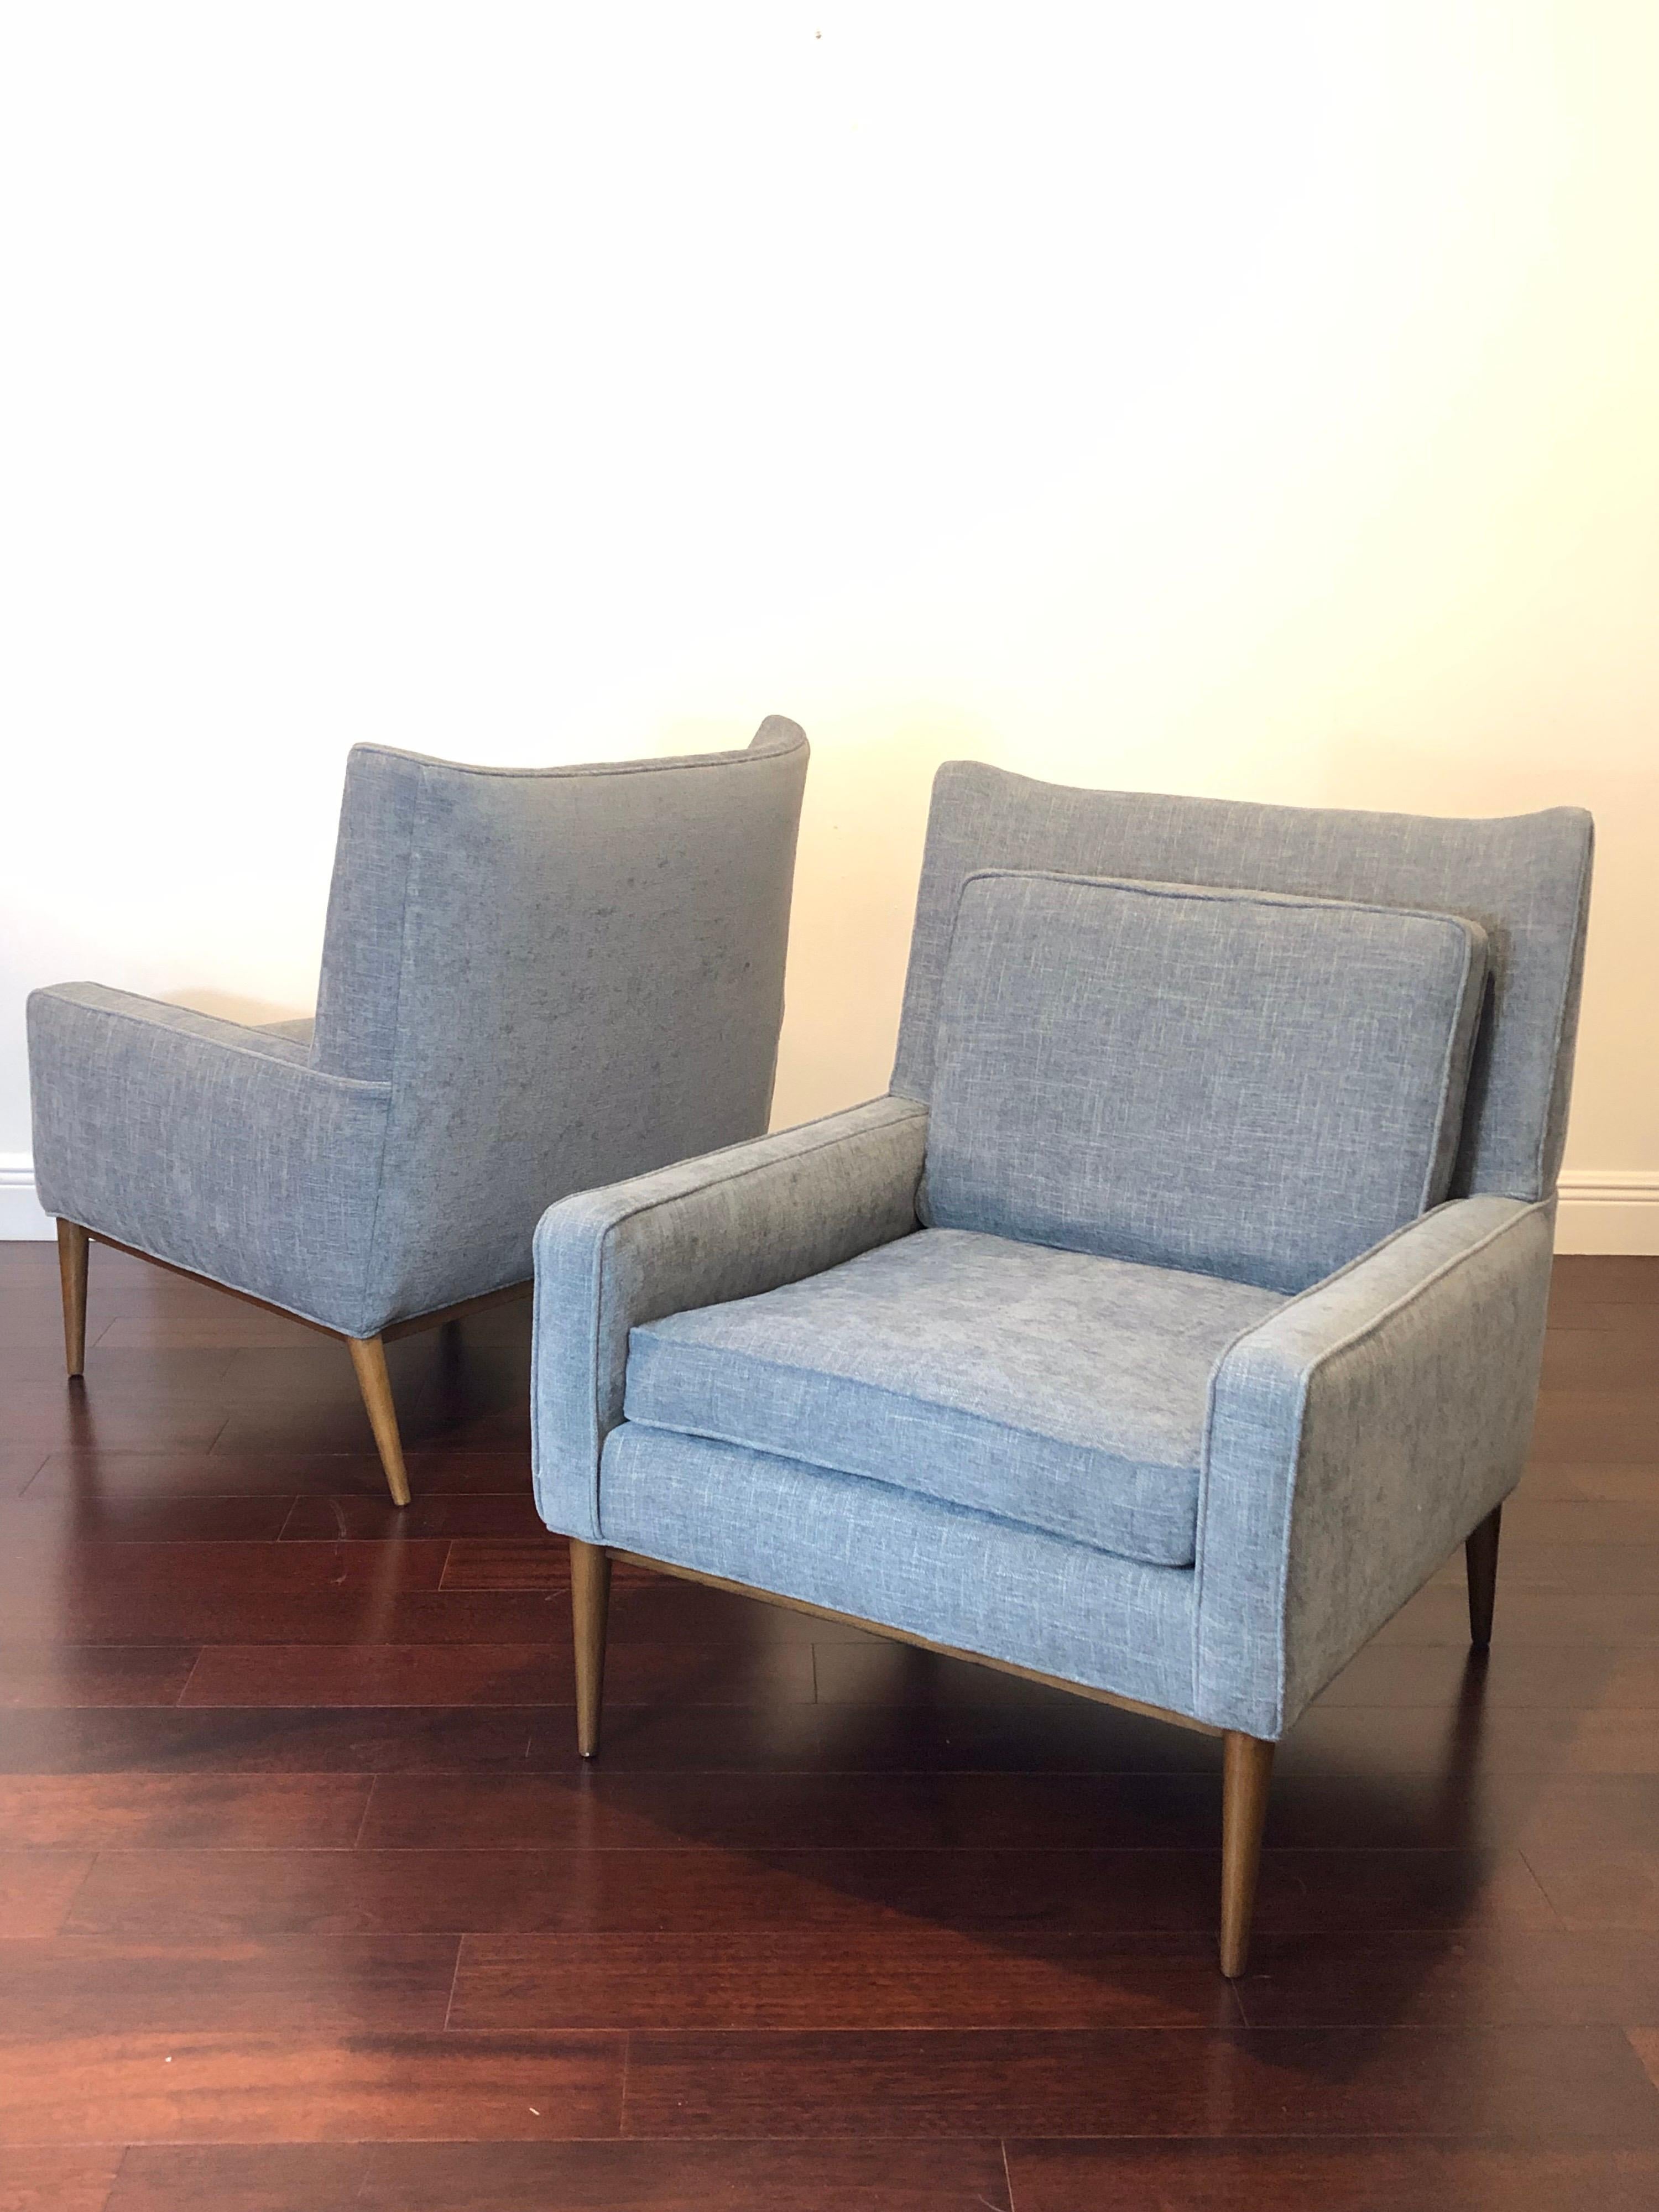 Wonderfully restored pair of Paul McCobb lounge chairs, model 1312. Upholstered in a steel grey with a small blue hue. Mahogany legs refinished in a walnut tone. New foam. These are a fine example of Mid-Century Modernism, with elegant tapered legs,